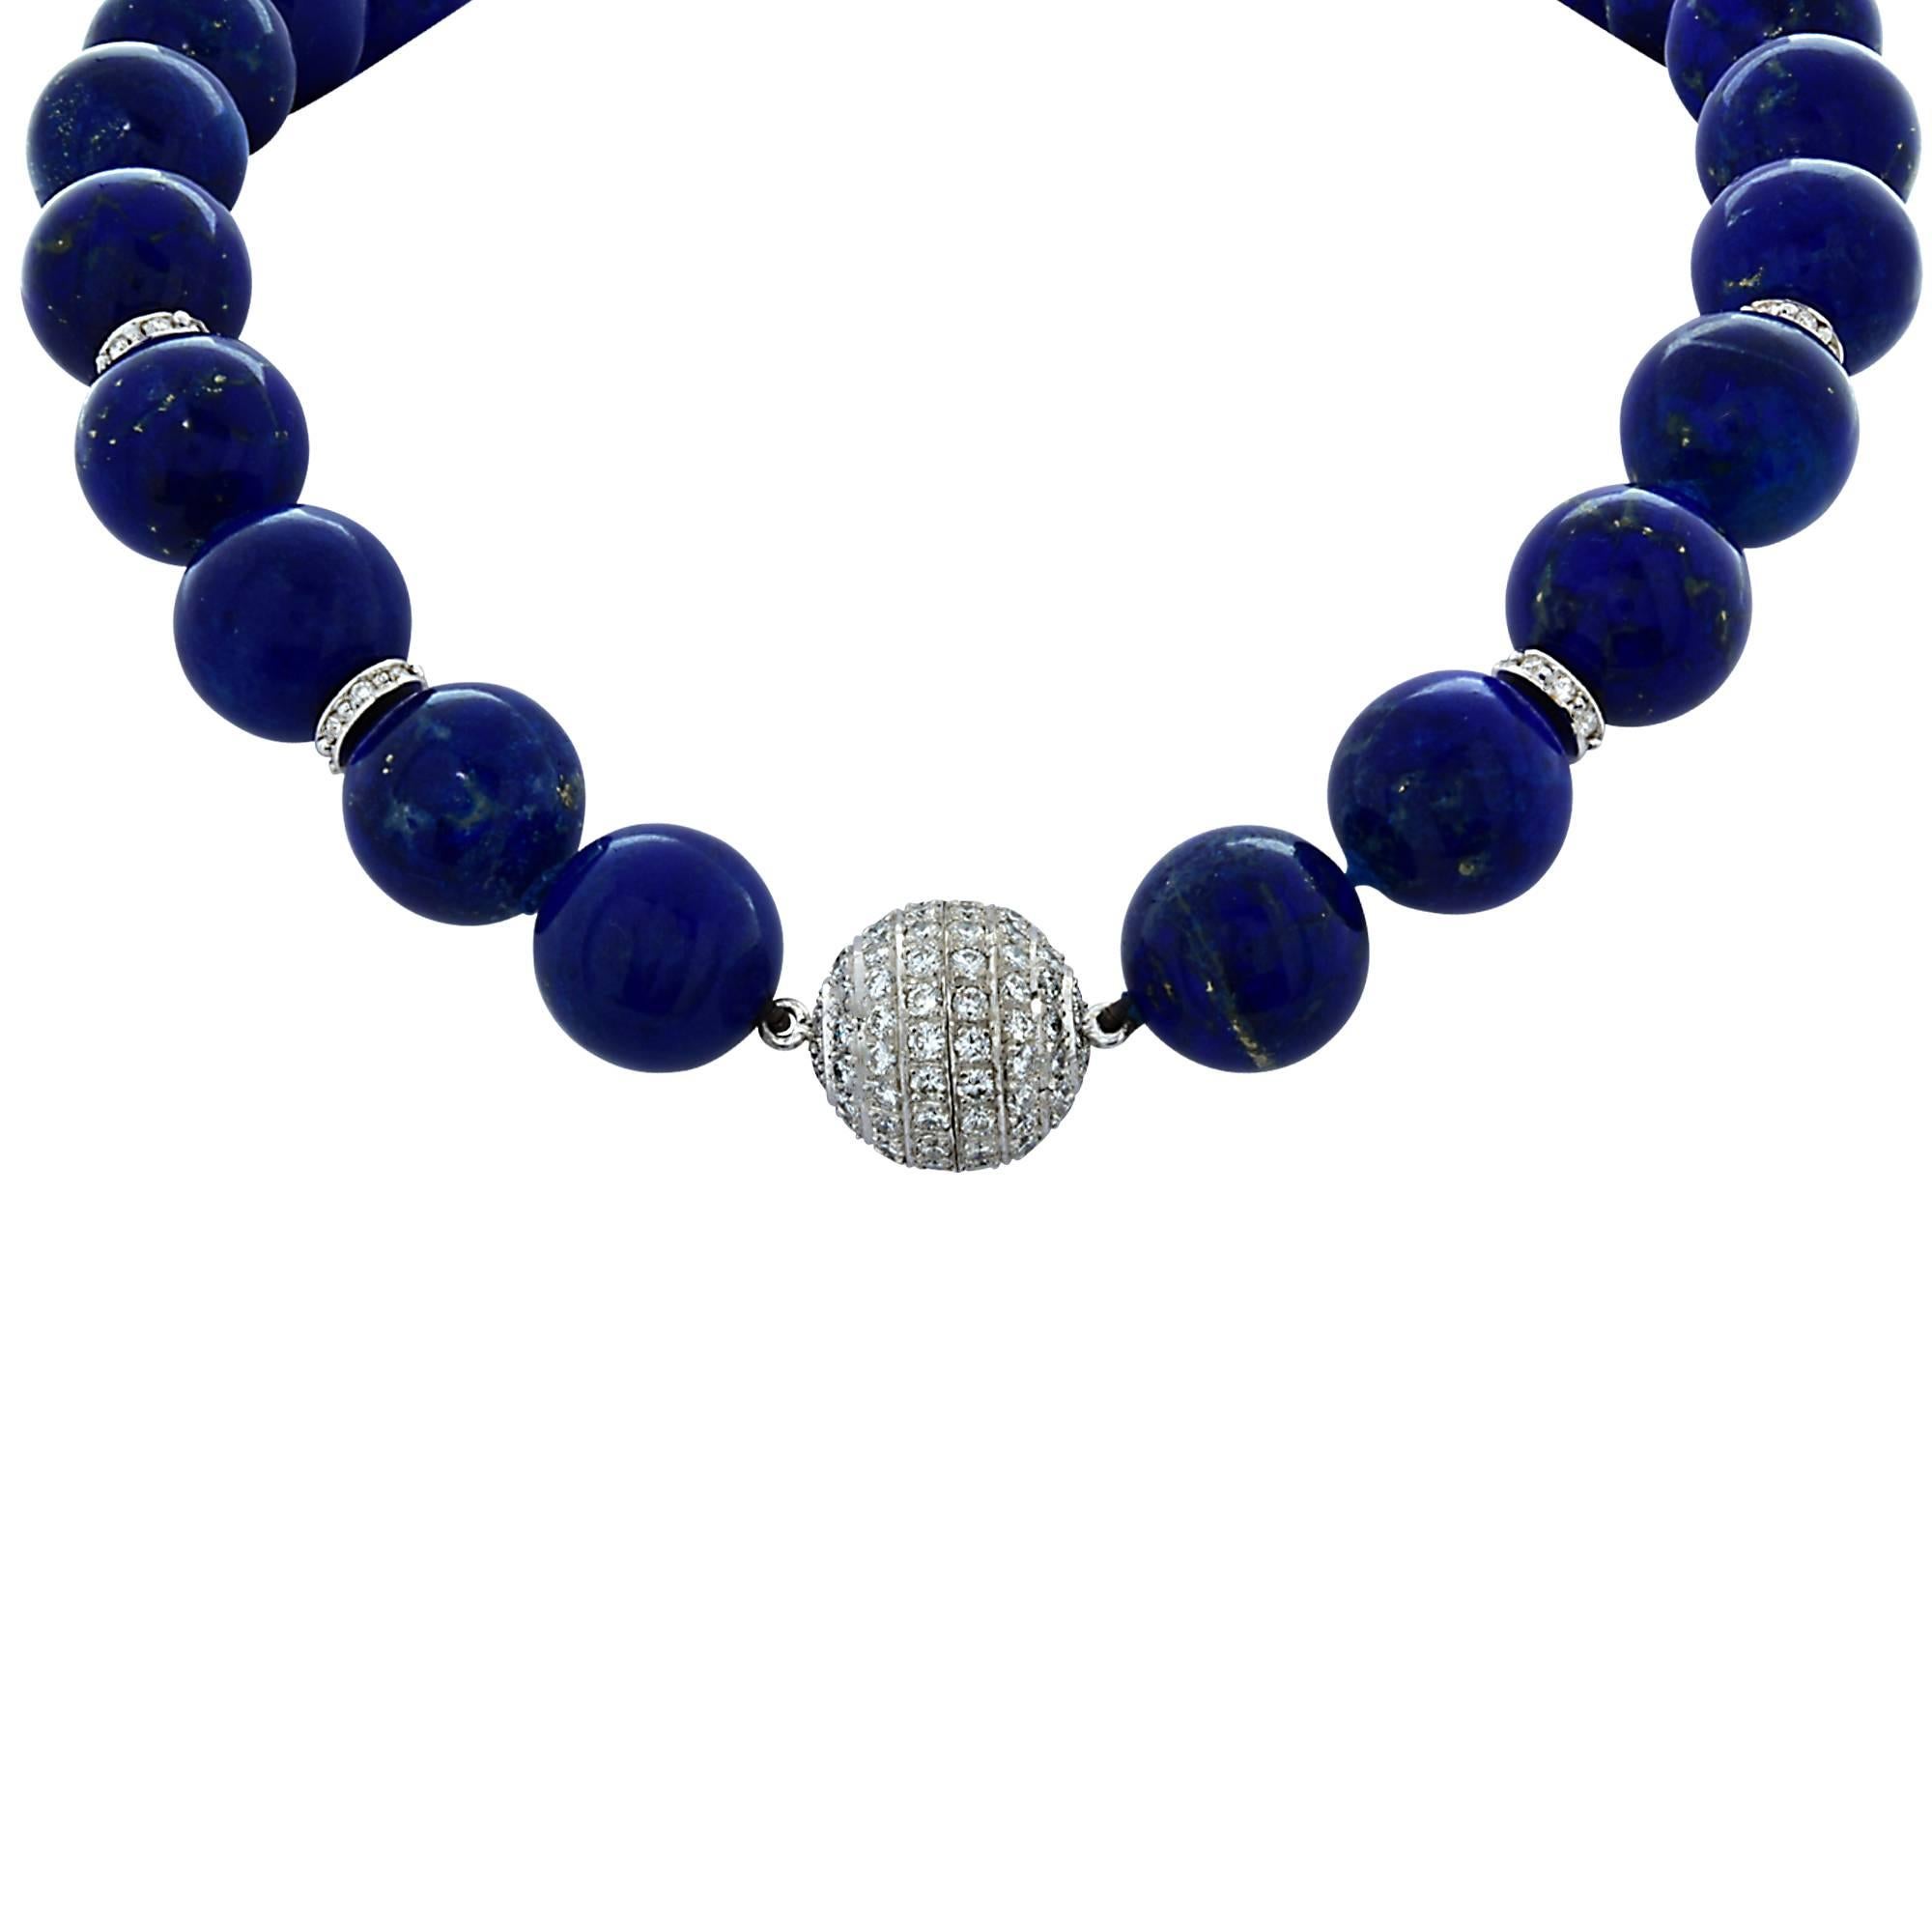 This exquisite lapis lazuli necklace features a magnificently crafted diamond clasp and rhondells. The diamond clasp and rondells are studded with 138 sparkly and lively round brilliant cut diamonds weighing 4.70cts total, VS1-2 clarity, G color.